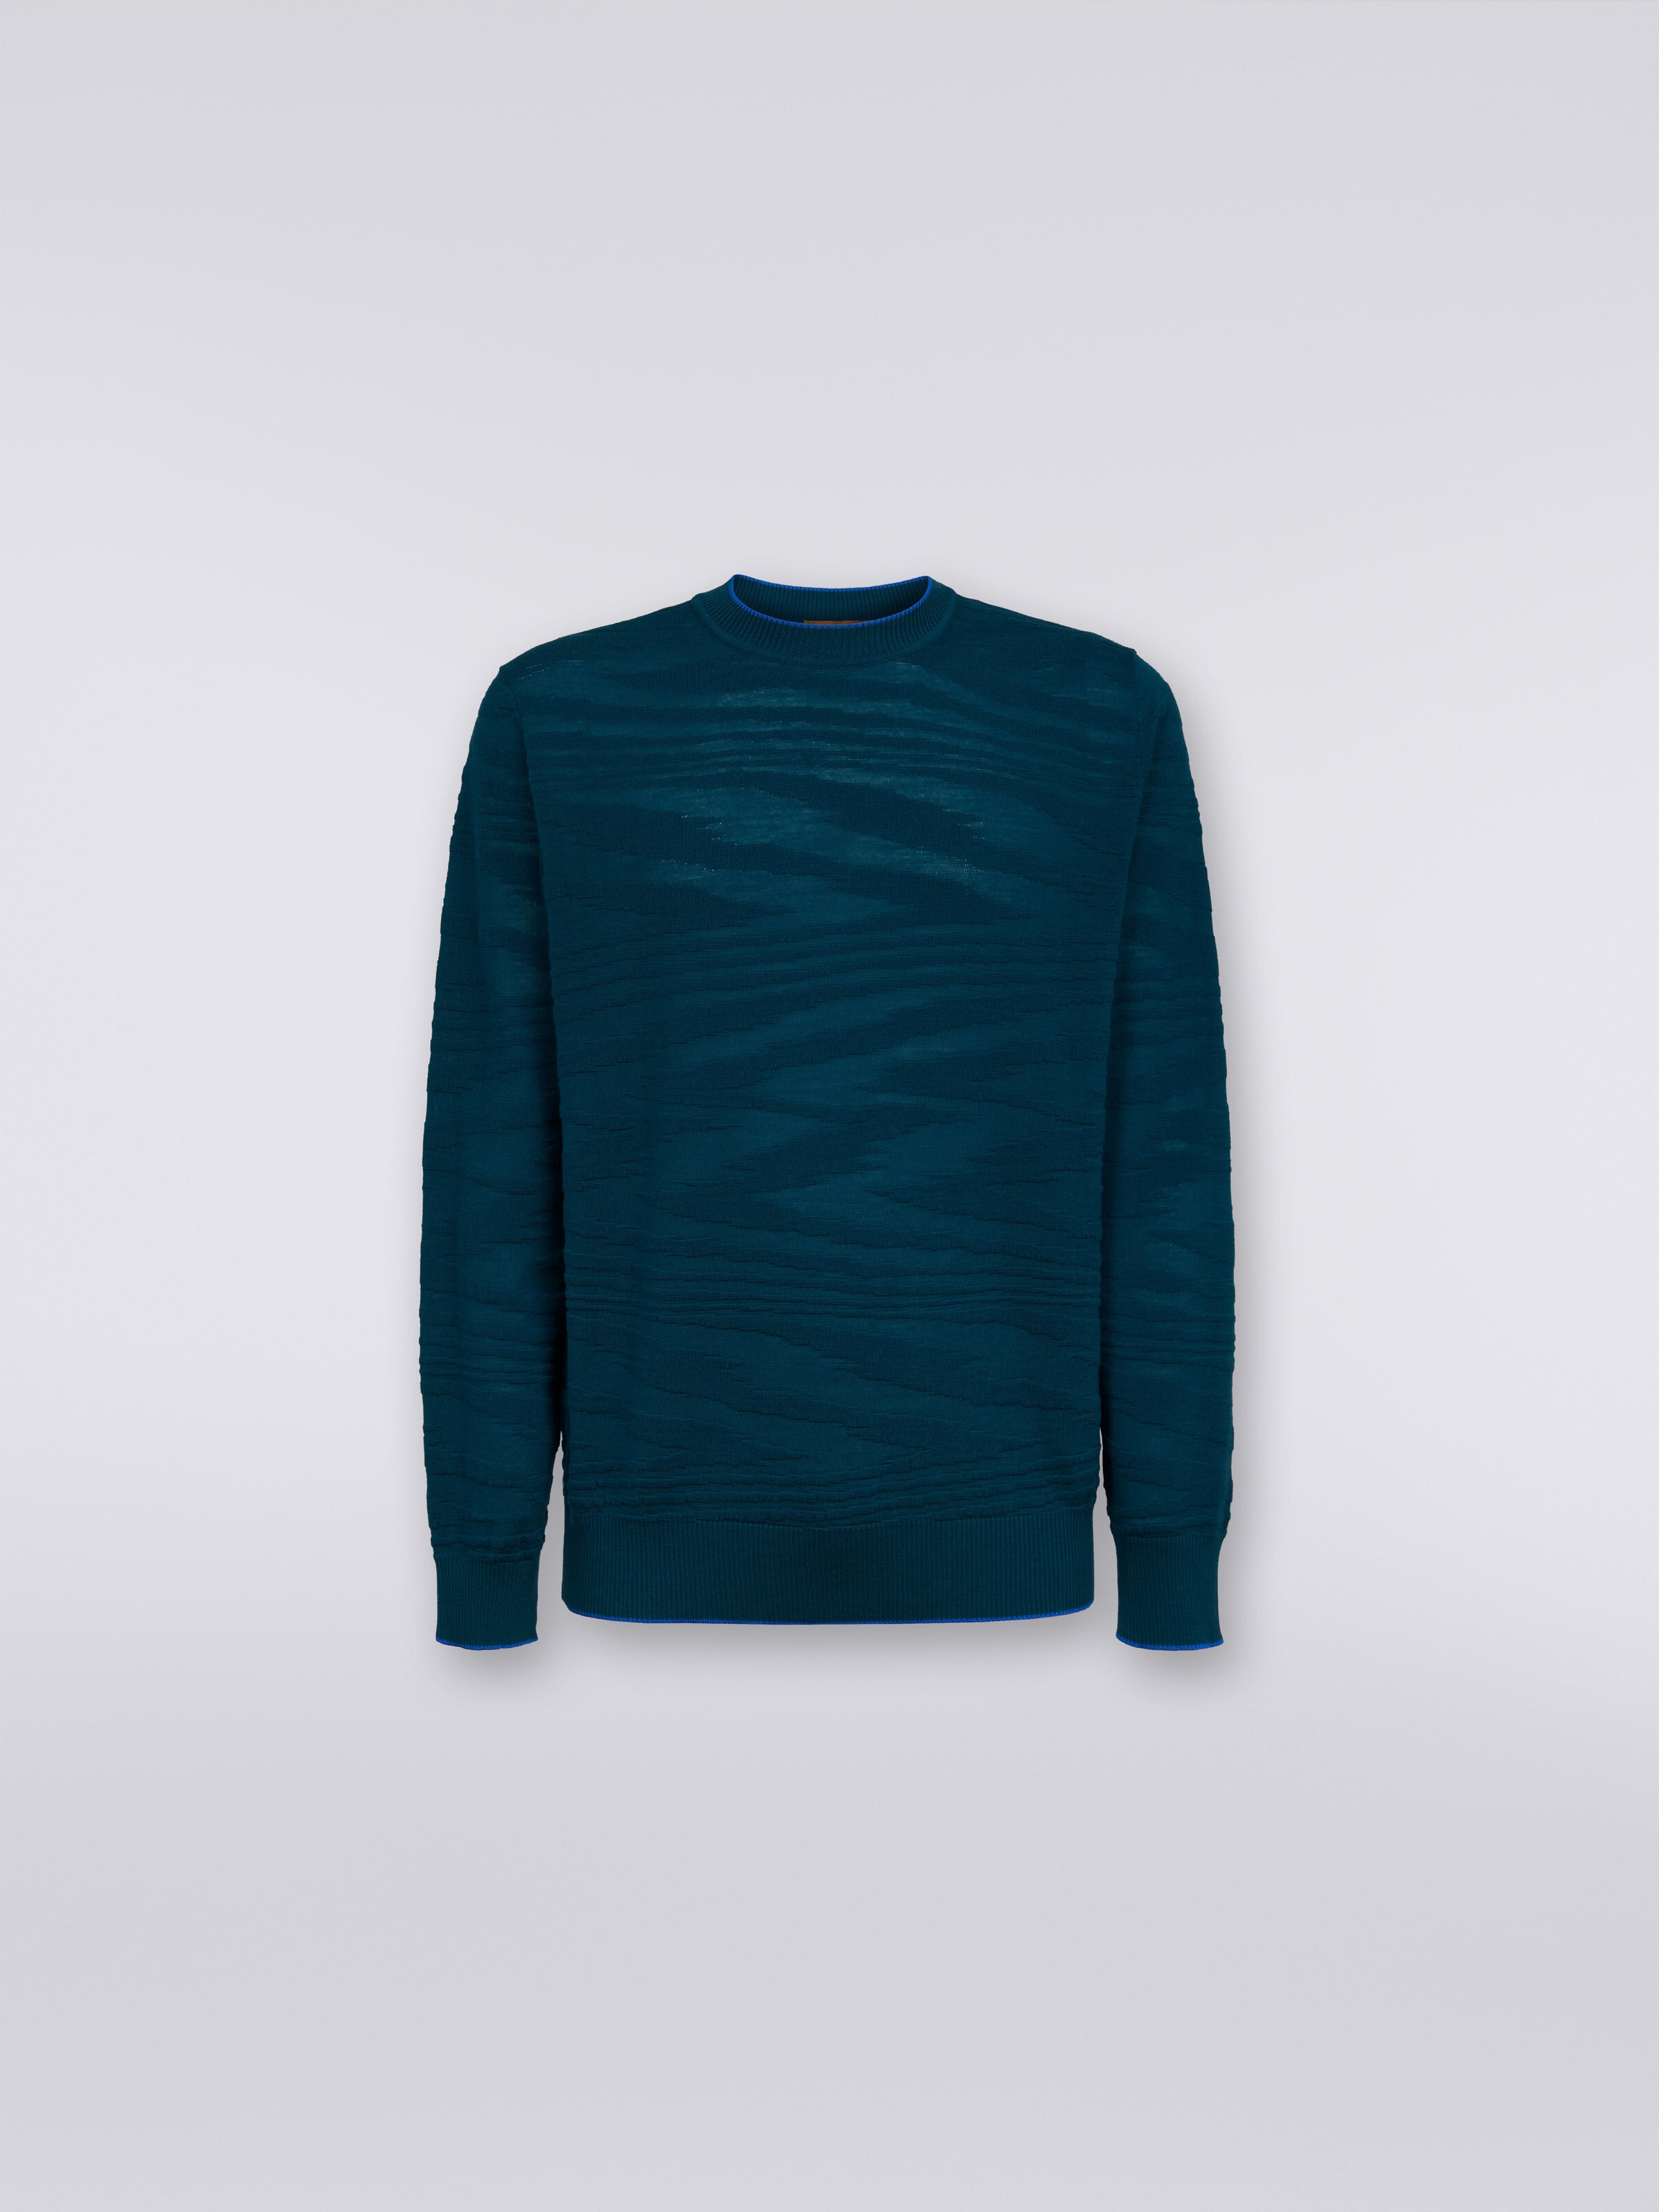 Embossed wool and viscose crew-neck pullover, Green  - 0